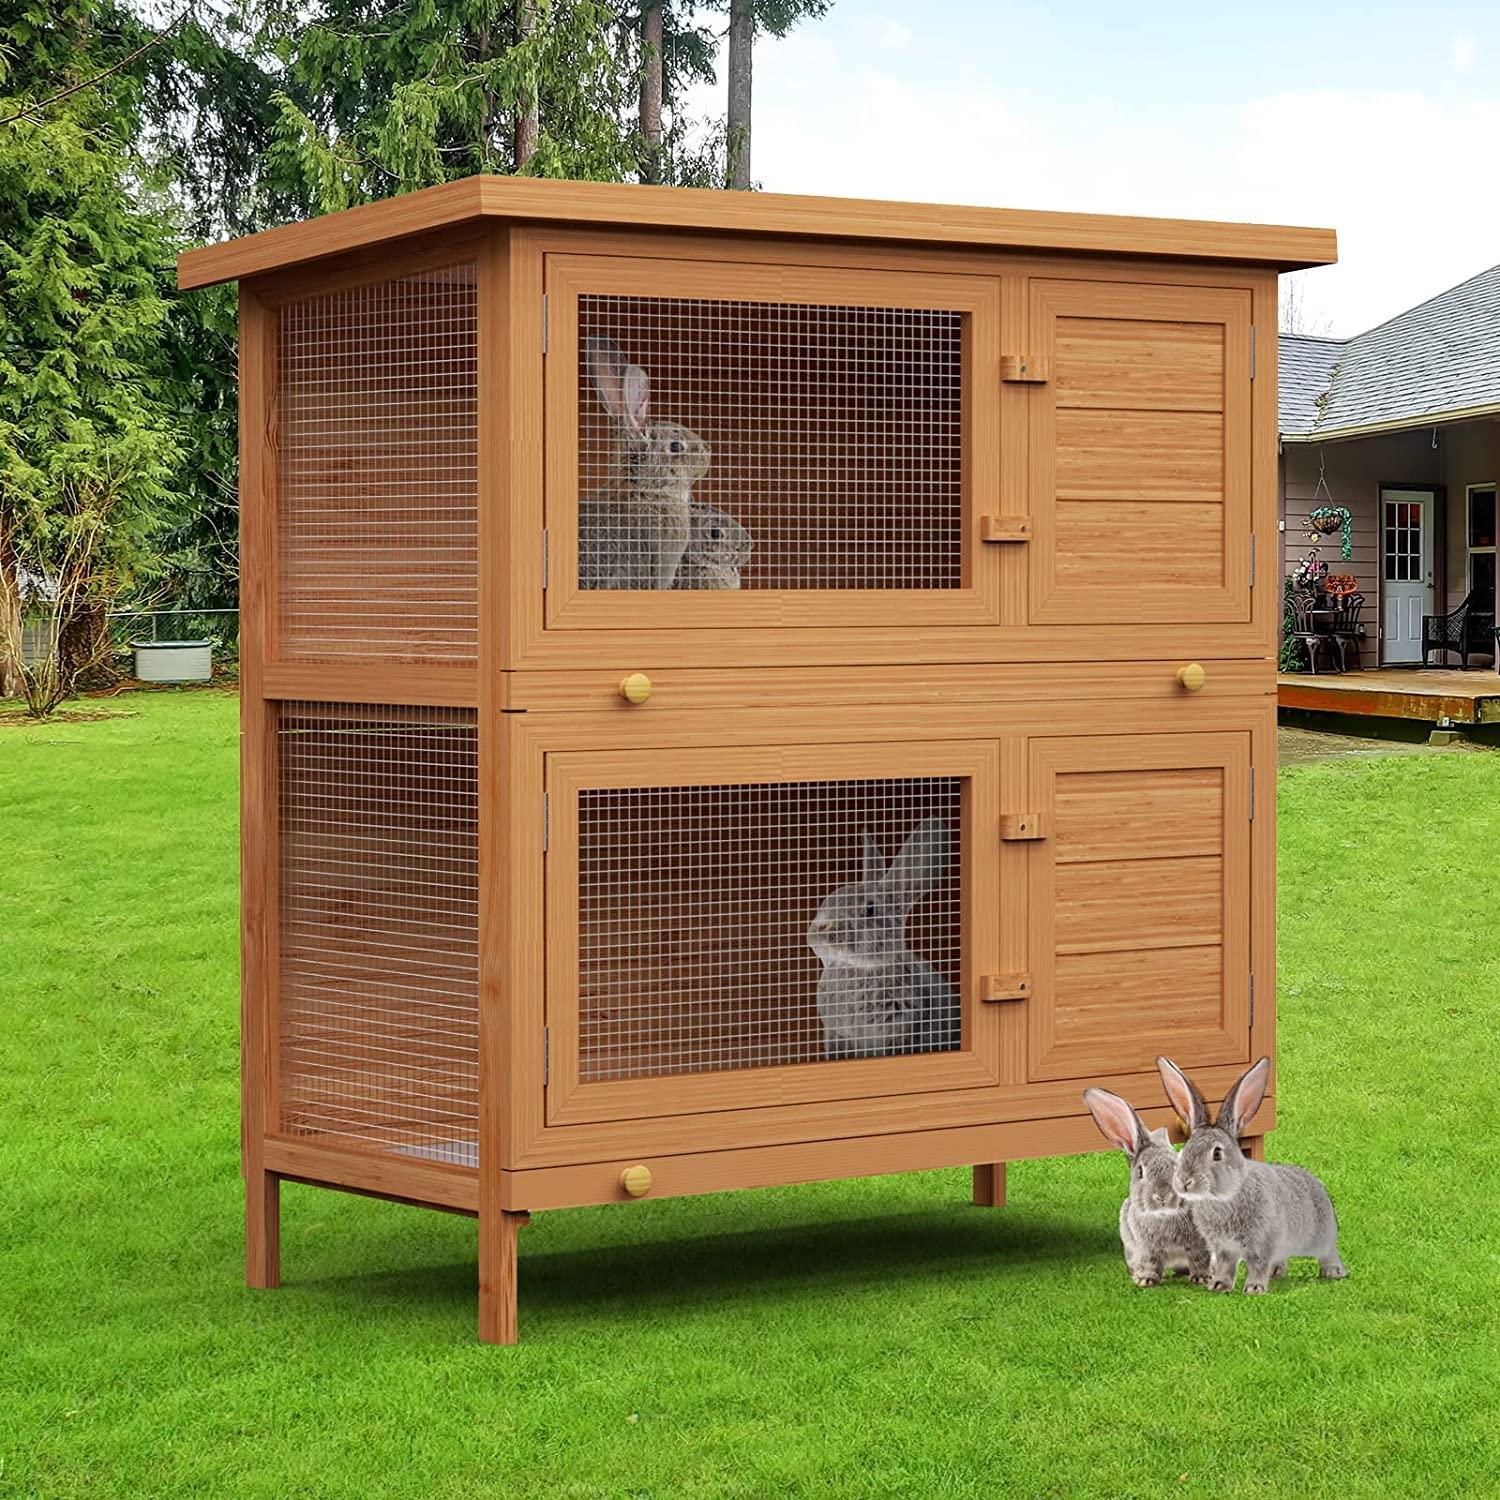 Advwin Rabbit Hutch Chicken Coop Guinea Pig Cage Brown